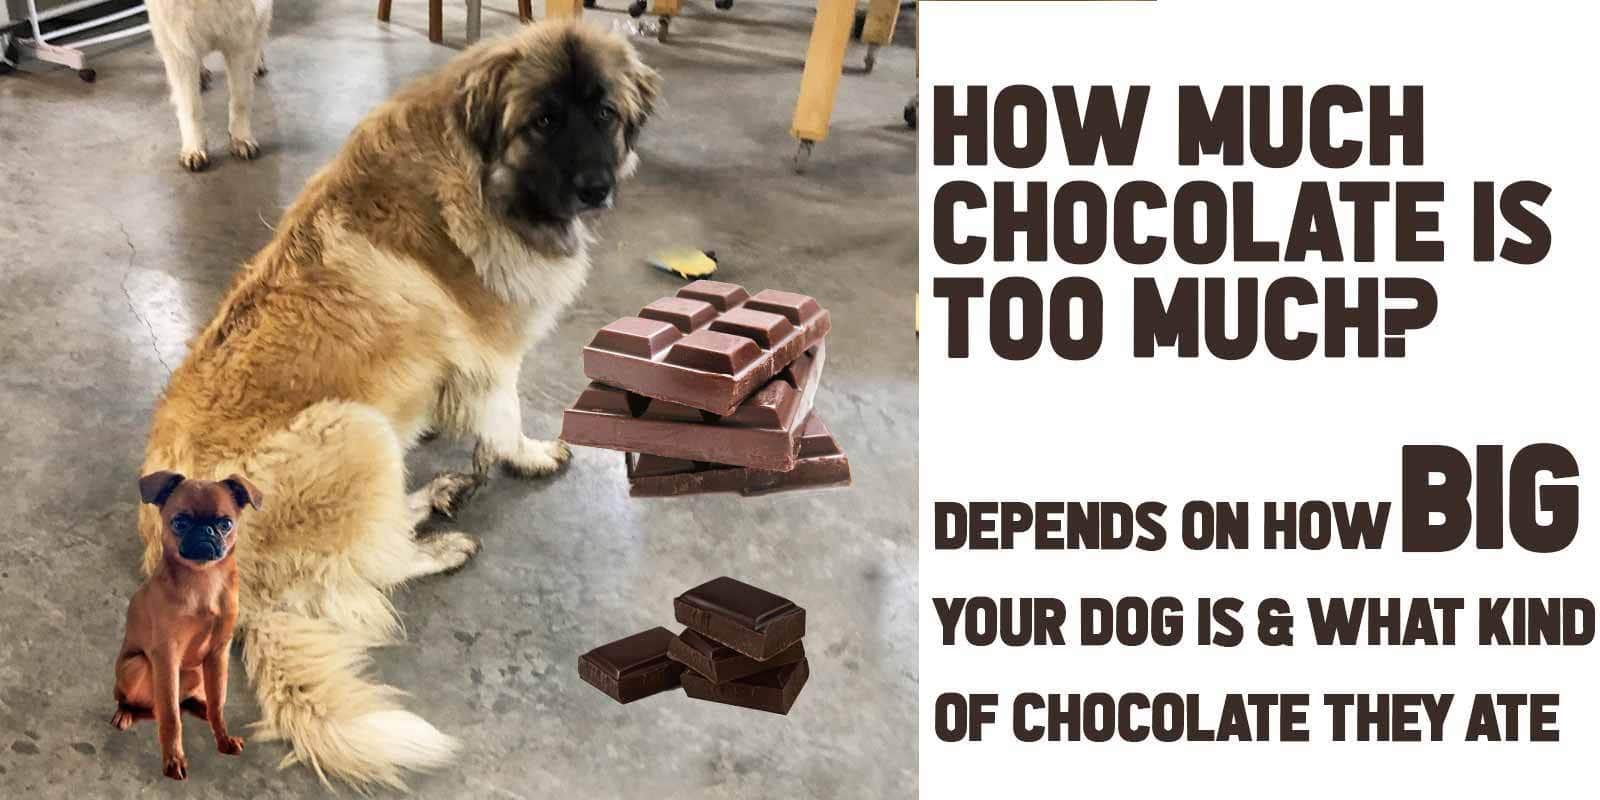 Chocolate - How Much Is REALLY Too Much for Dogs?